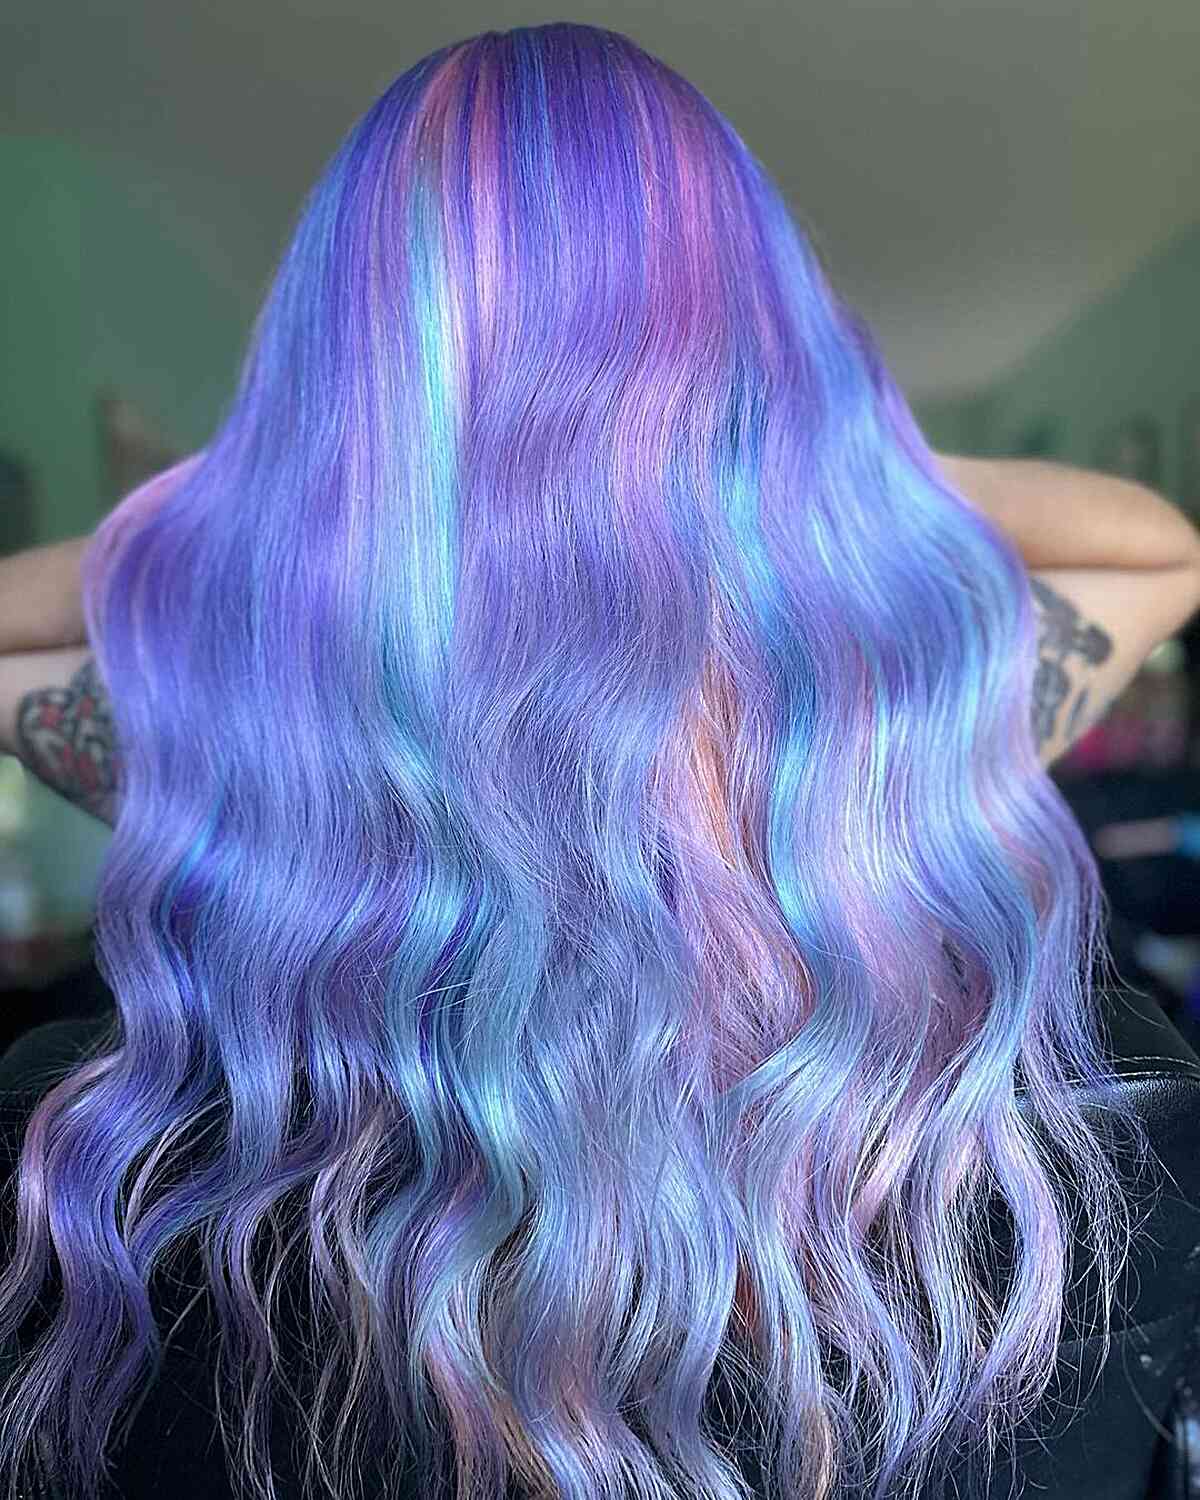 Long Cotton Candy Purple Hair with Teal Highlights